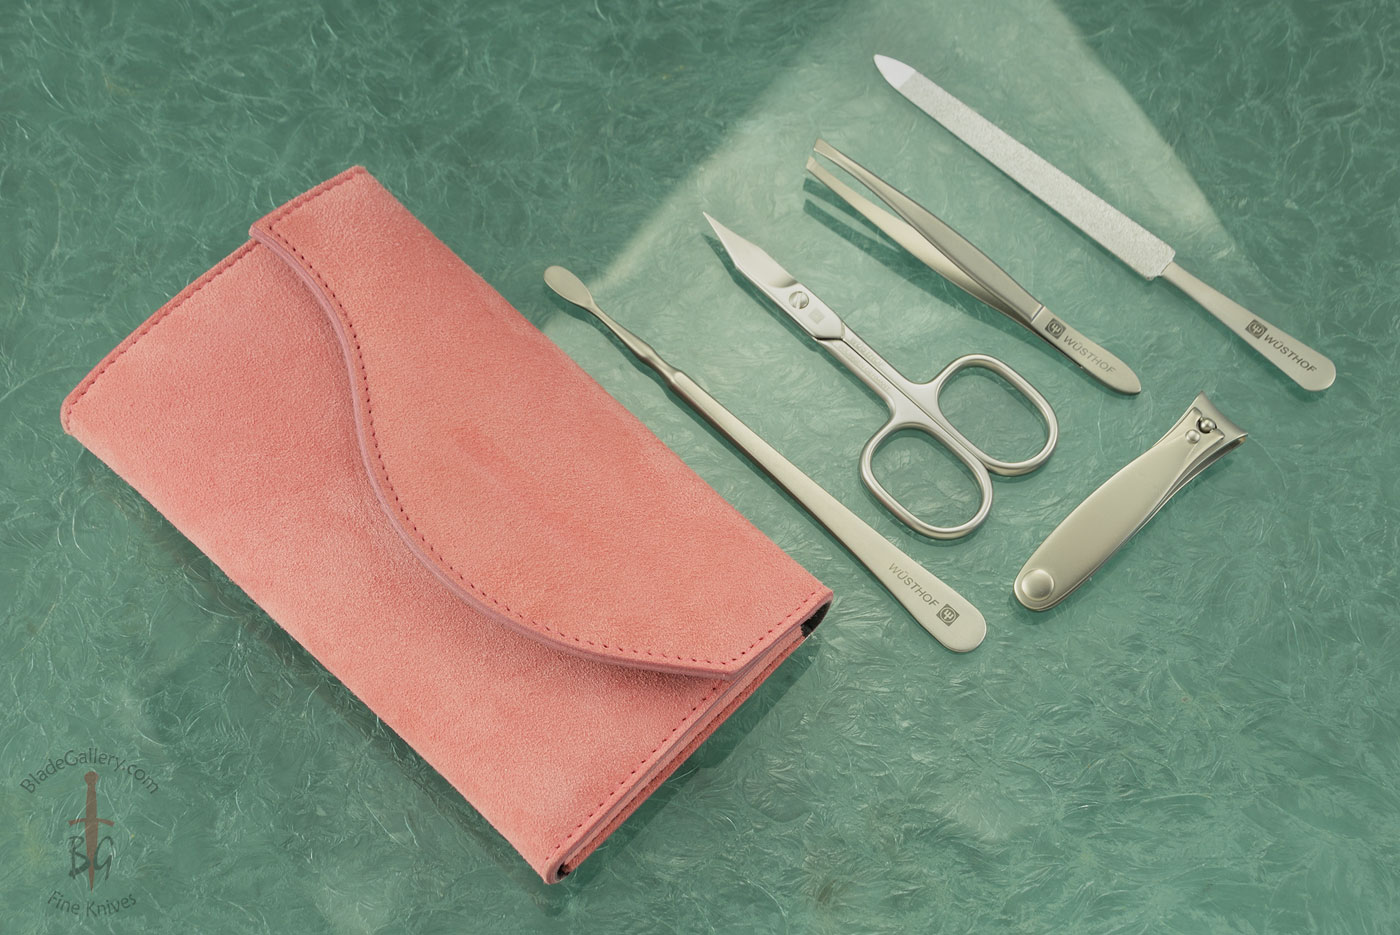 Manicure Set - 6 Pcs, Stainless Steel with Leather Case (9135)